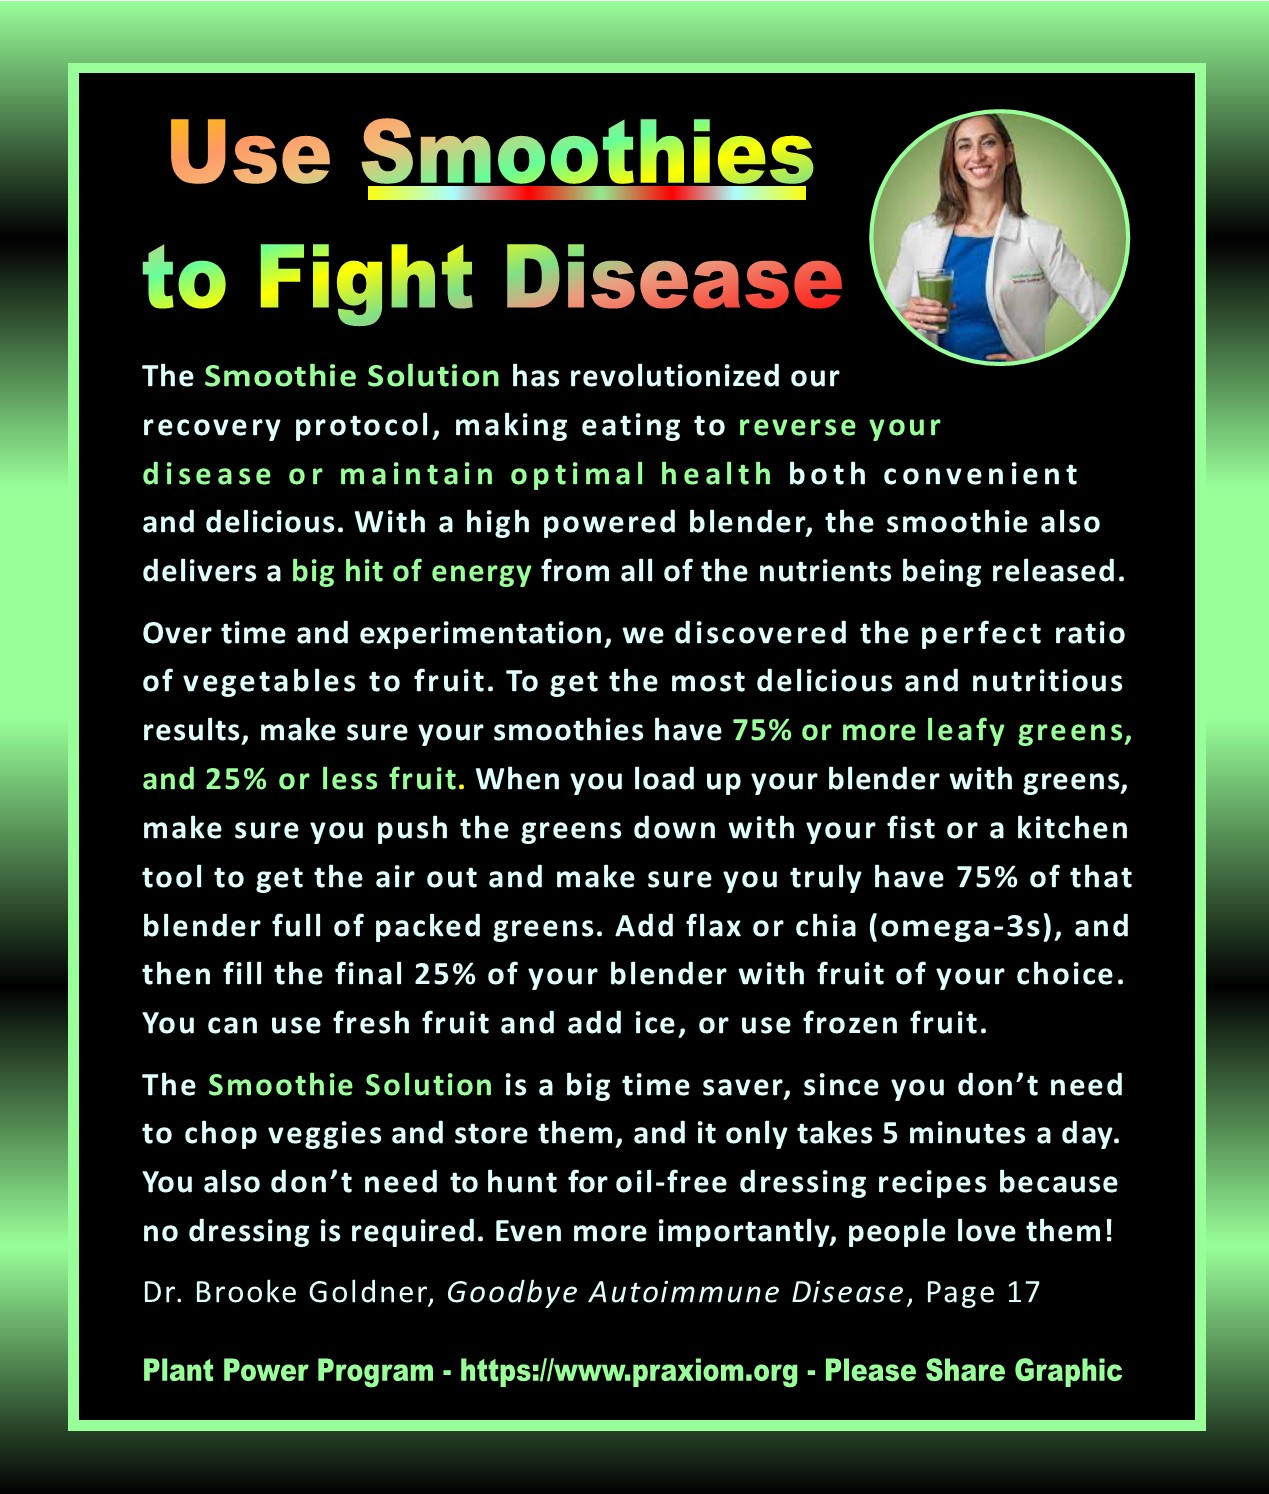 Use Smoothies to Reverse Disease - Dr. Brooke Goldner